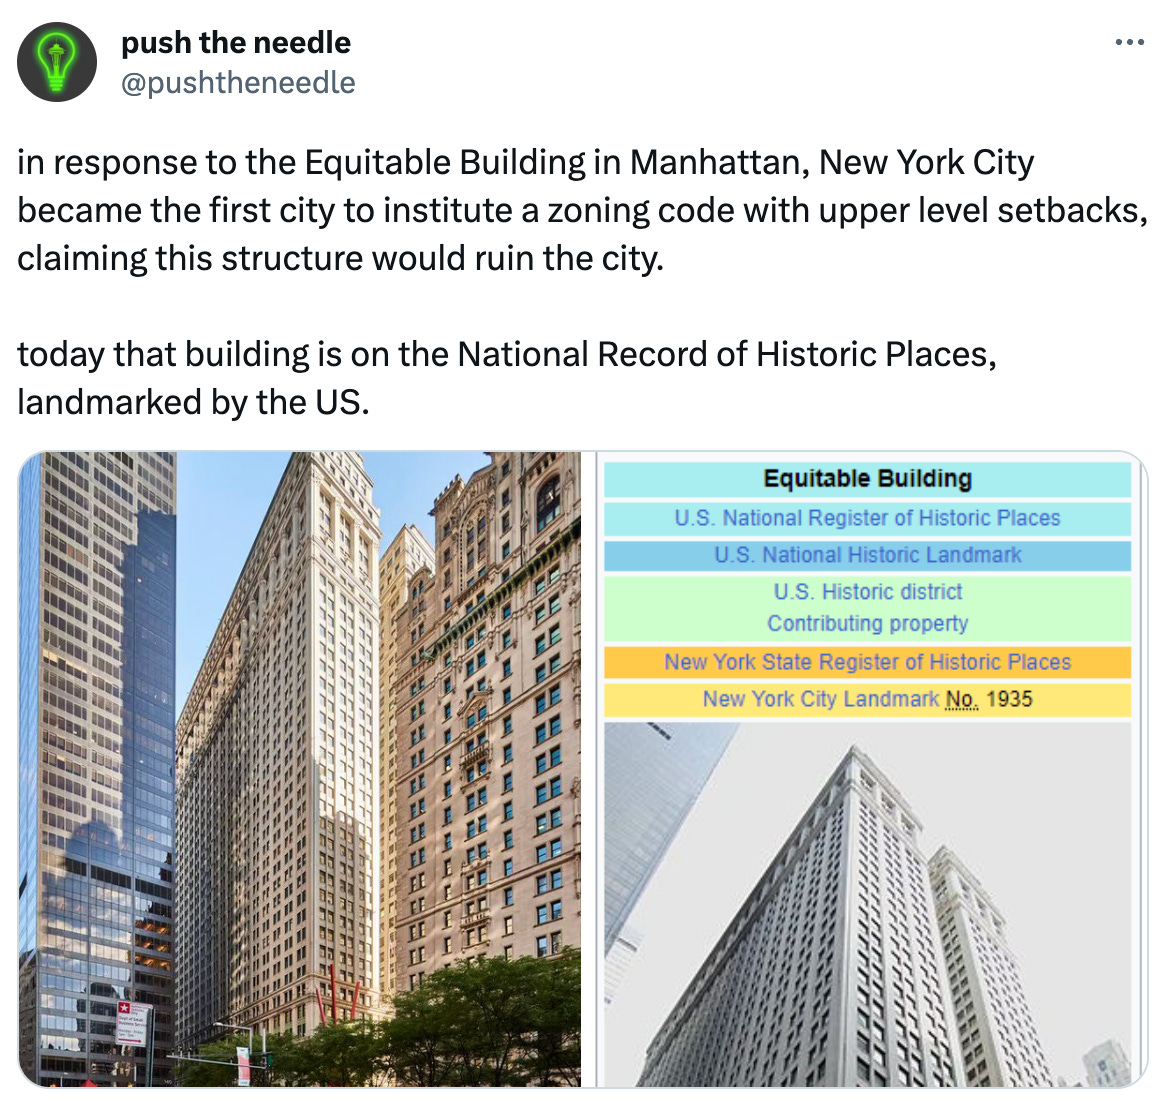  See new posts Conversation push the needle @pushtheneedle in response to the Equitable Building in Manhattan, New York City became the first city to institute a zoning code with upper level setbacks, claiming this structure would ruin the city.  today that building is on the National Record of Historic Places, landmarked by the US.